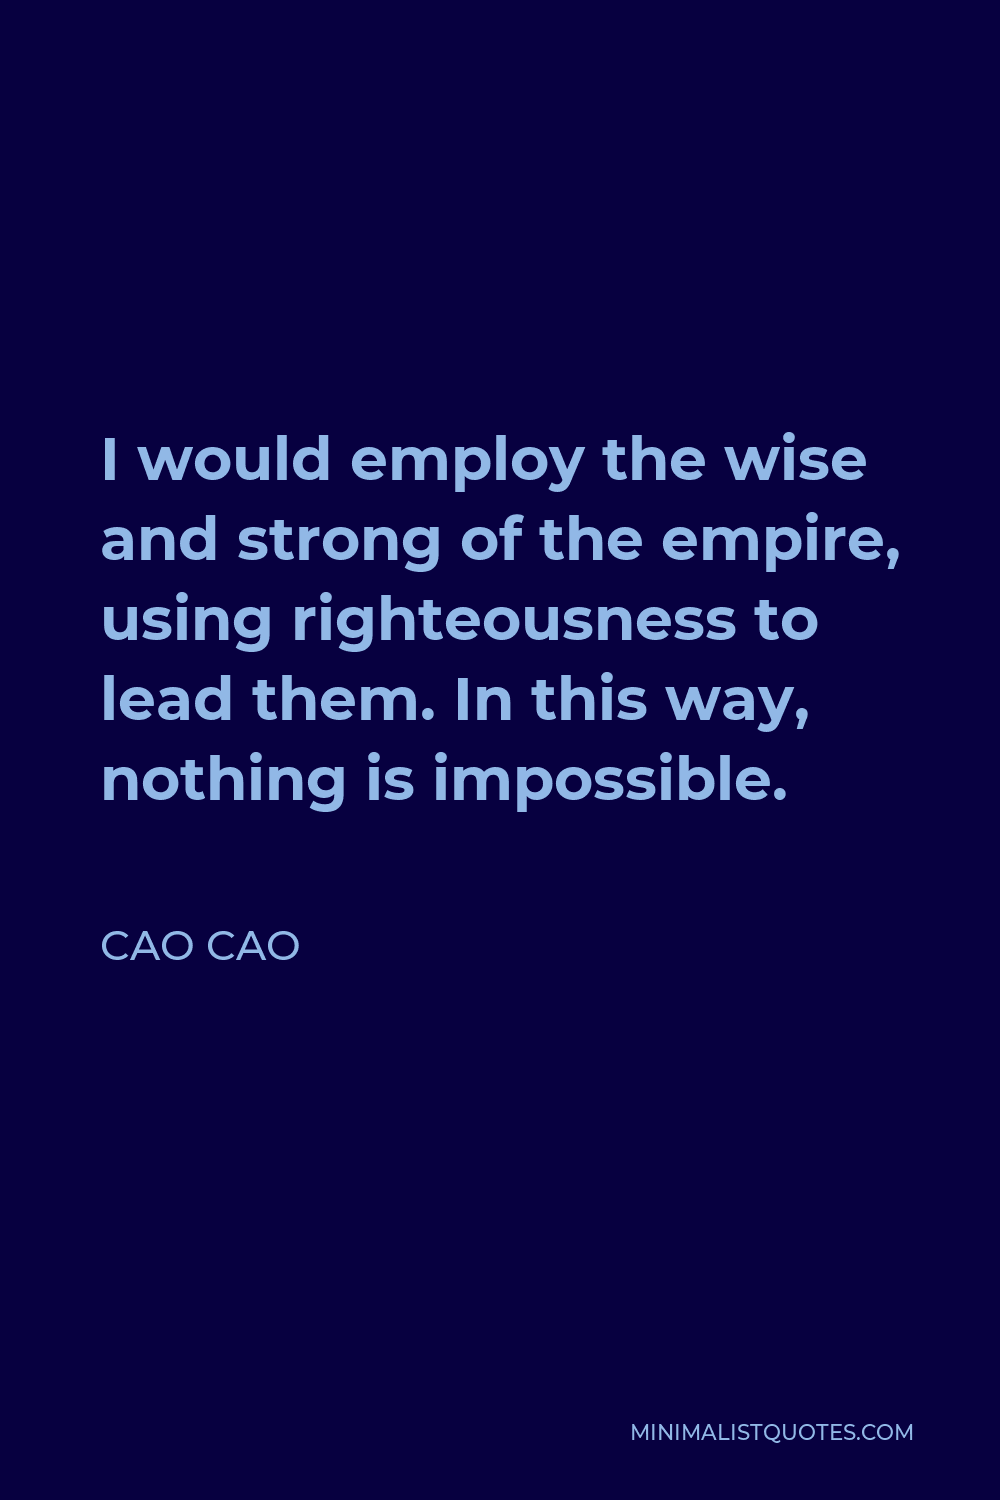 Cao Cao Quote - I would employ the wise and strong of the empire, using righteousness to lead them. In this way, nothing is impossible.